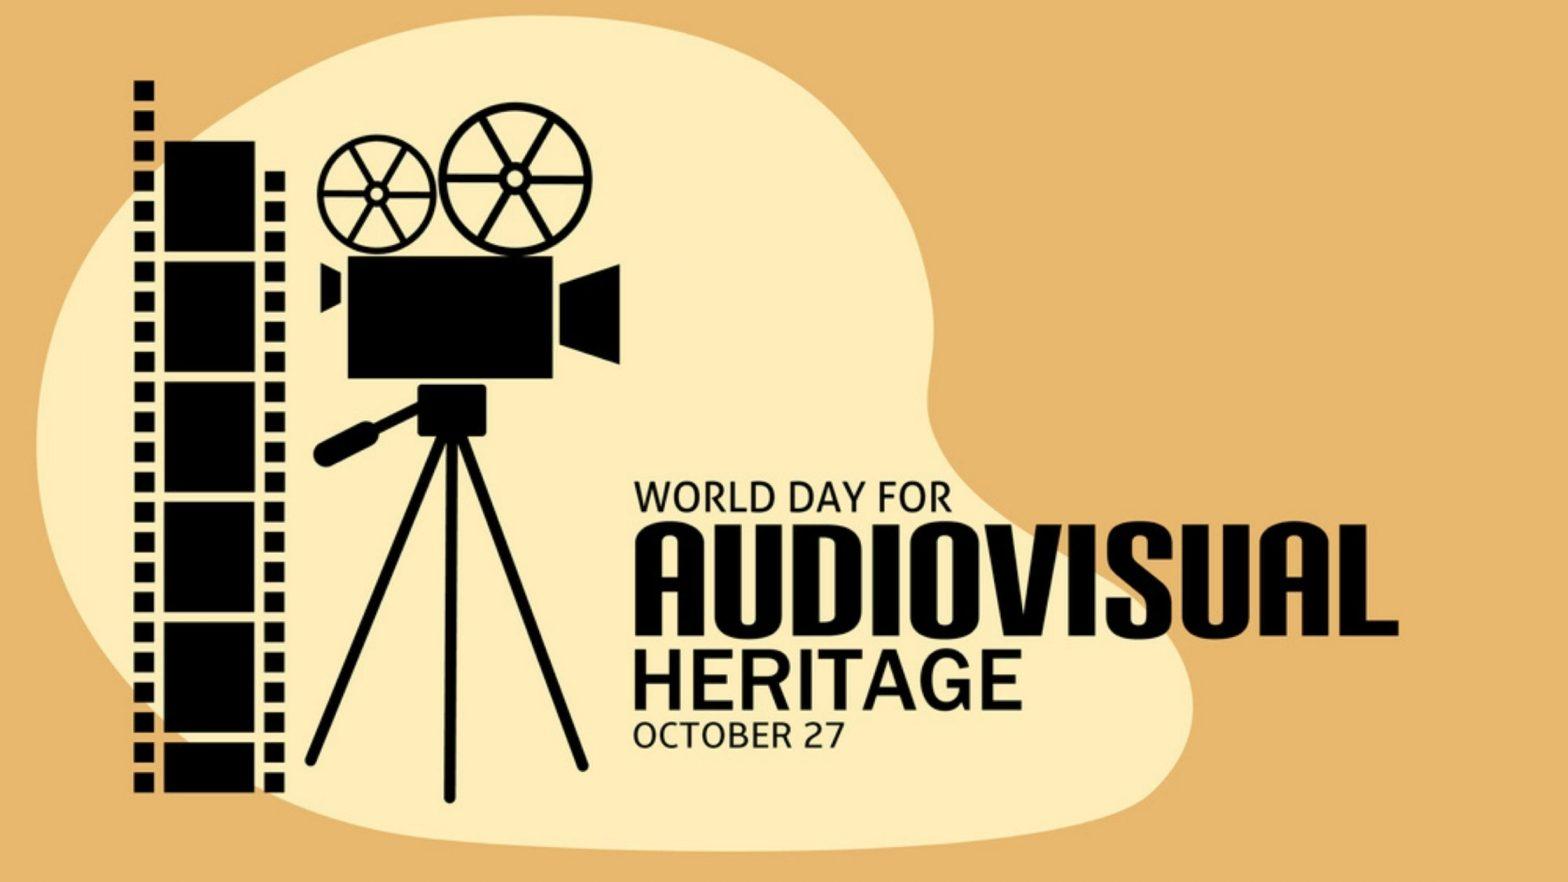 World Day for Audiovisual Heritage: 27 October